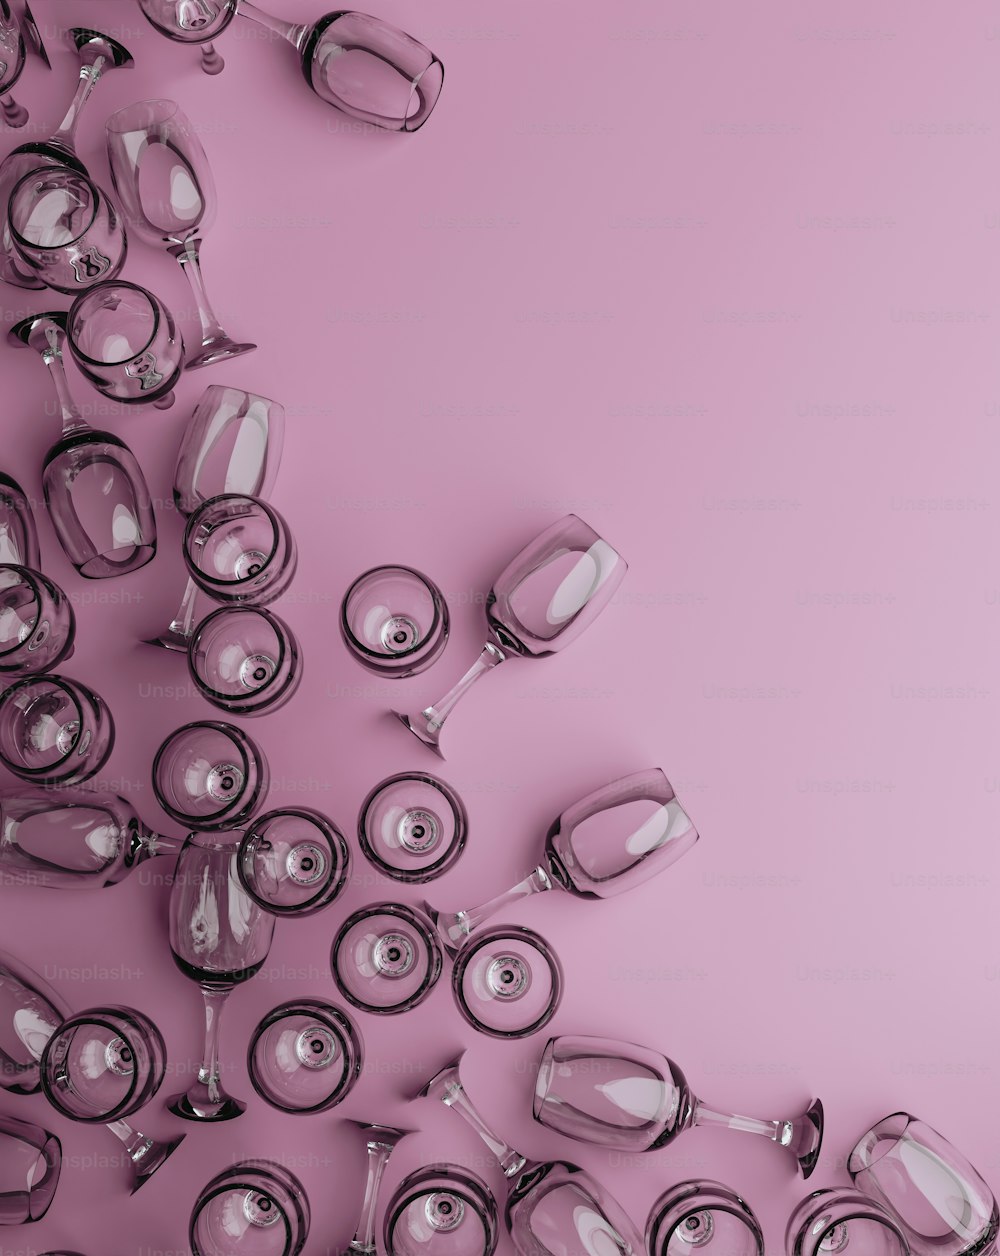 a group of wine glasses on a pink background